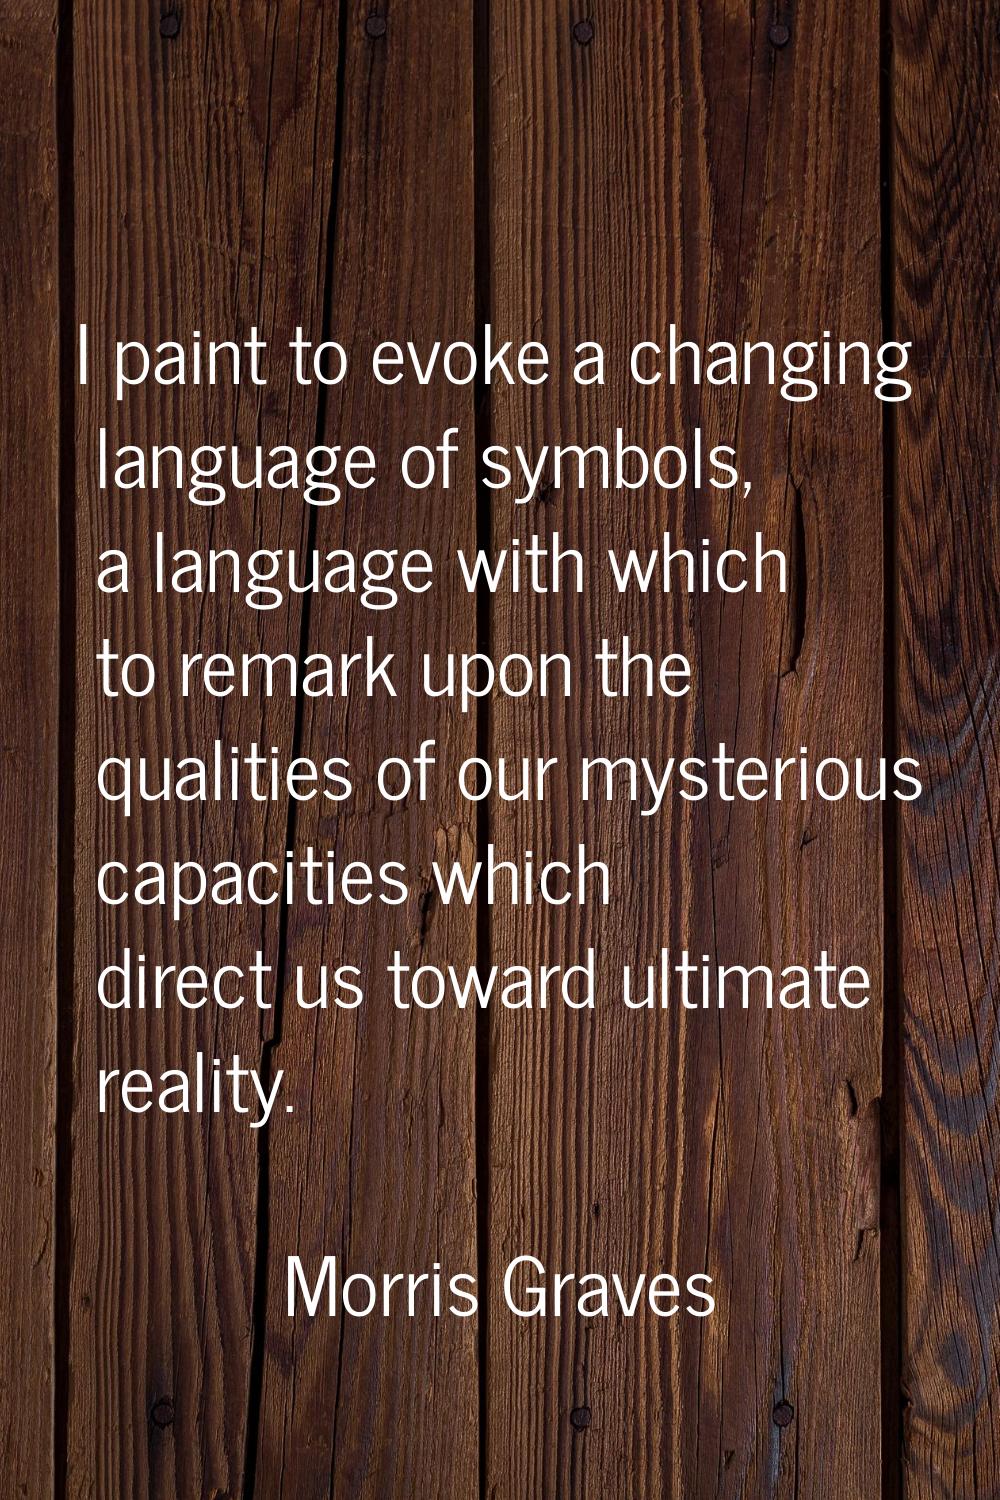 I paint to evoke a changing language of symbols, a language with which to remark upon the qualities